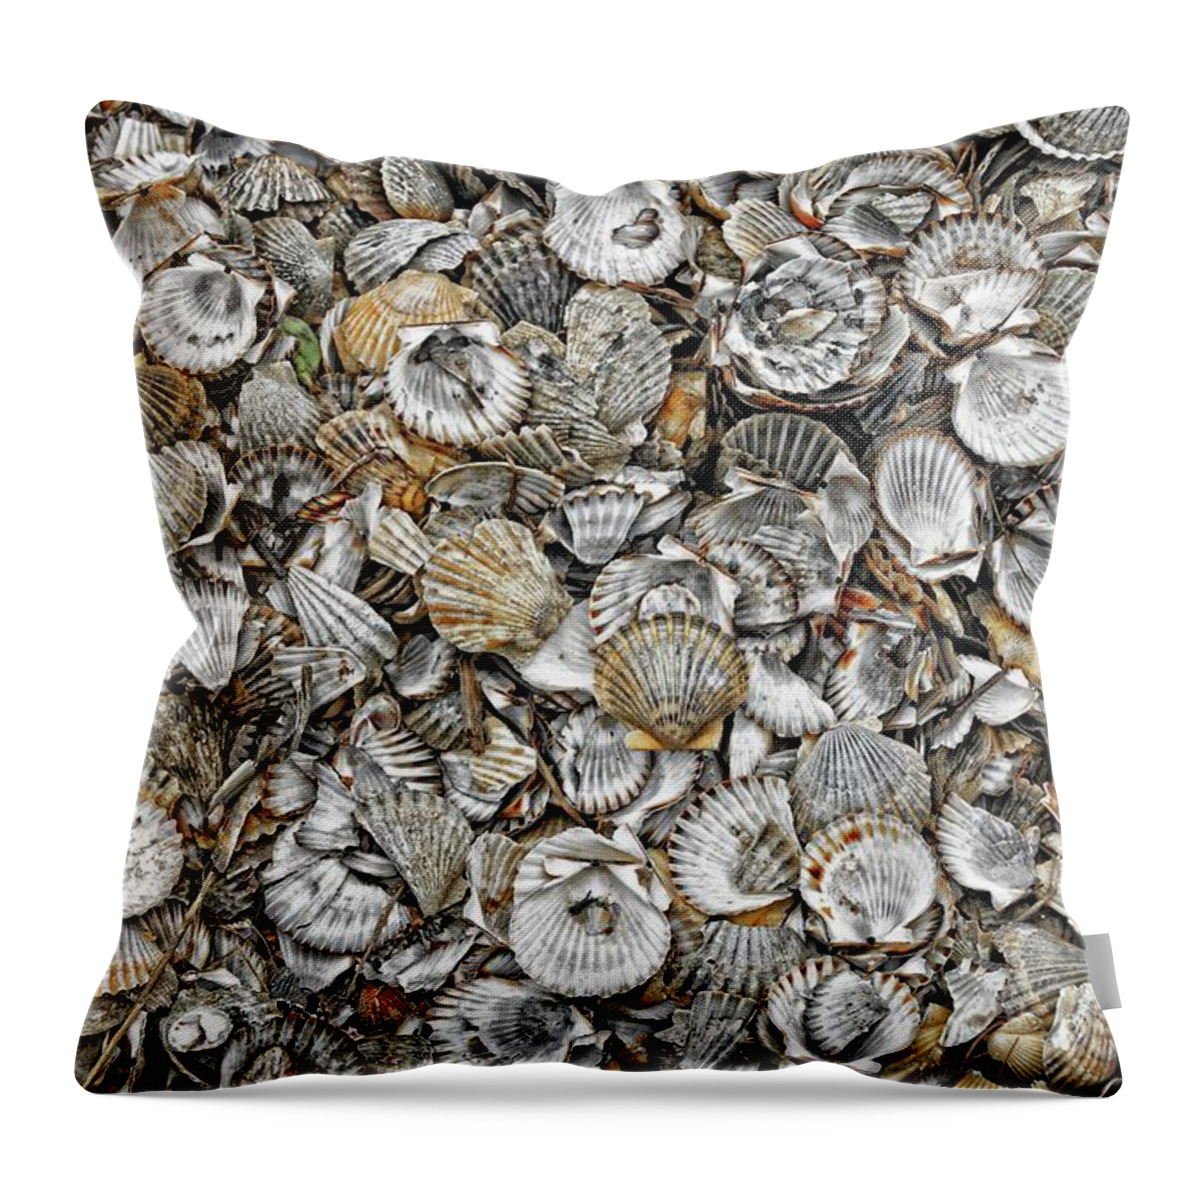 Cockleshells Throw Pillow featuring the photograph Cockleshells 1 by David Birchall